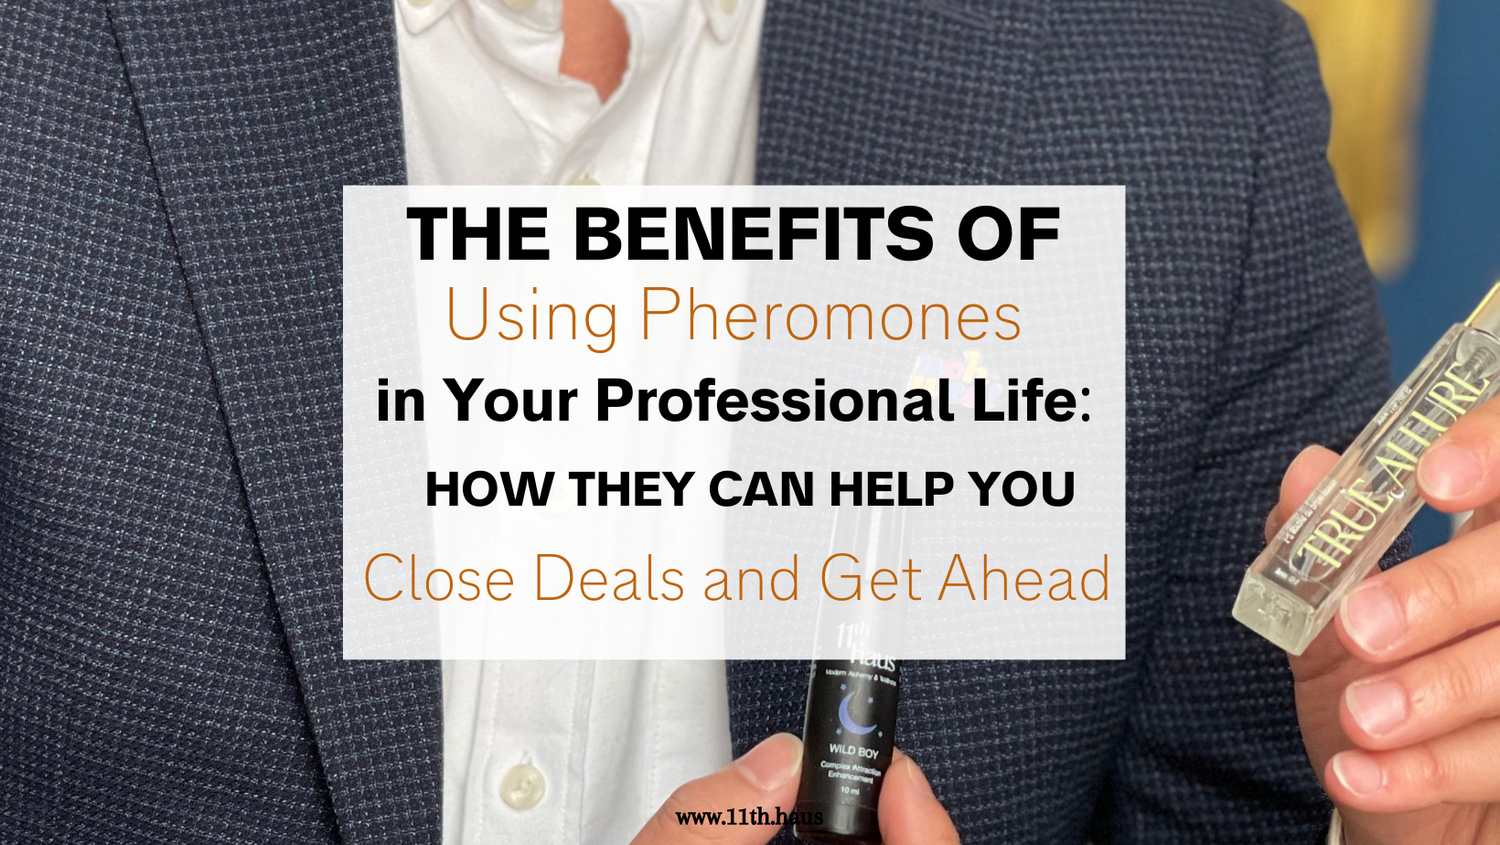 The Benefits of Using Pheromones in Your Professional Life: How They Can Help You Close Deals and Get Ahead